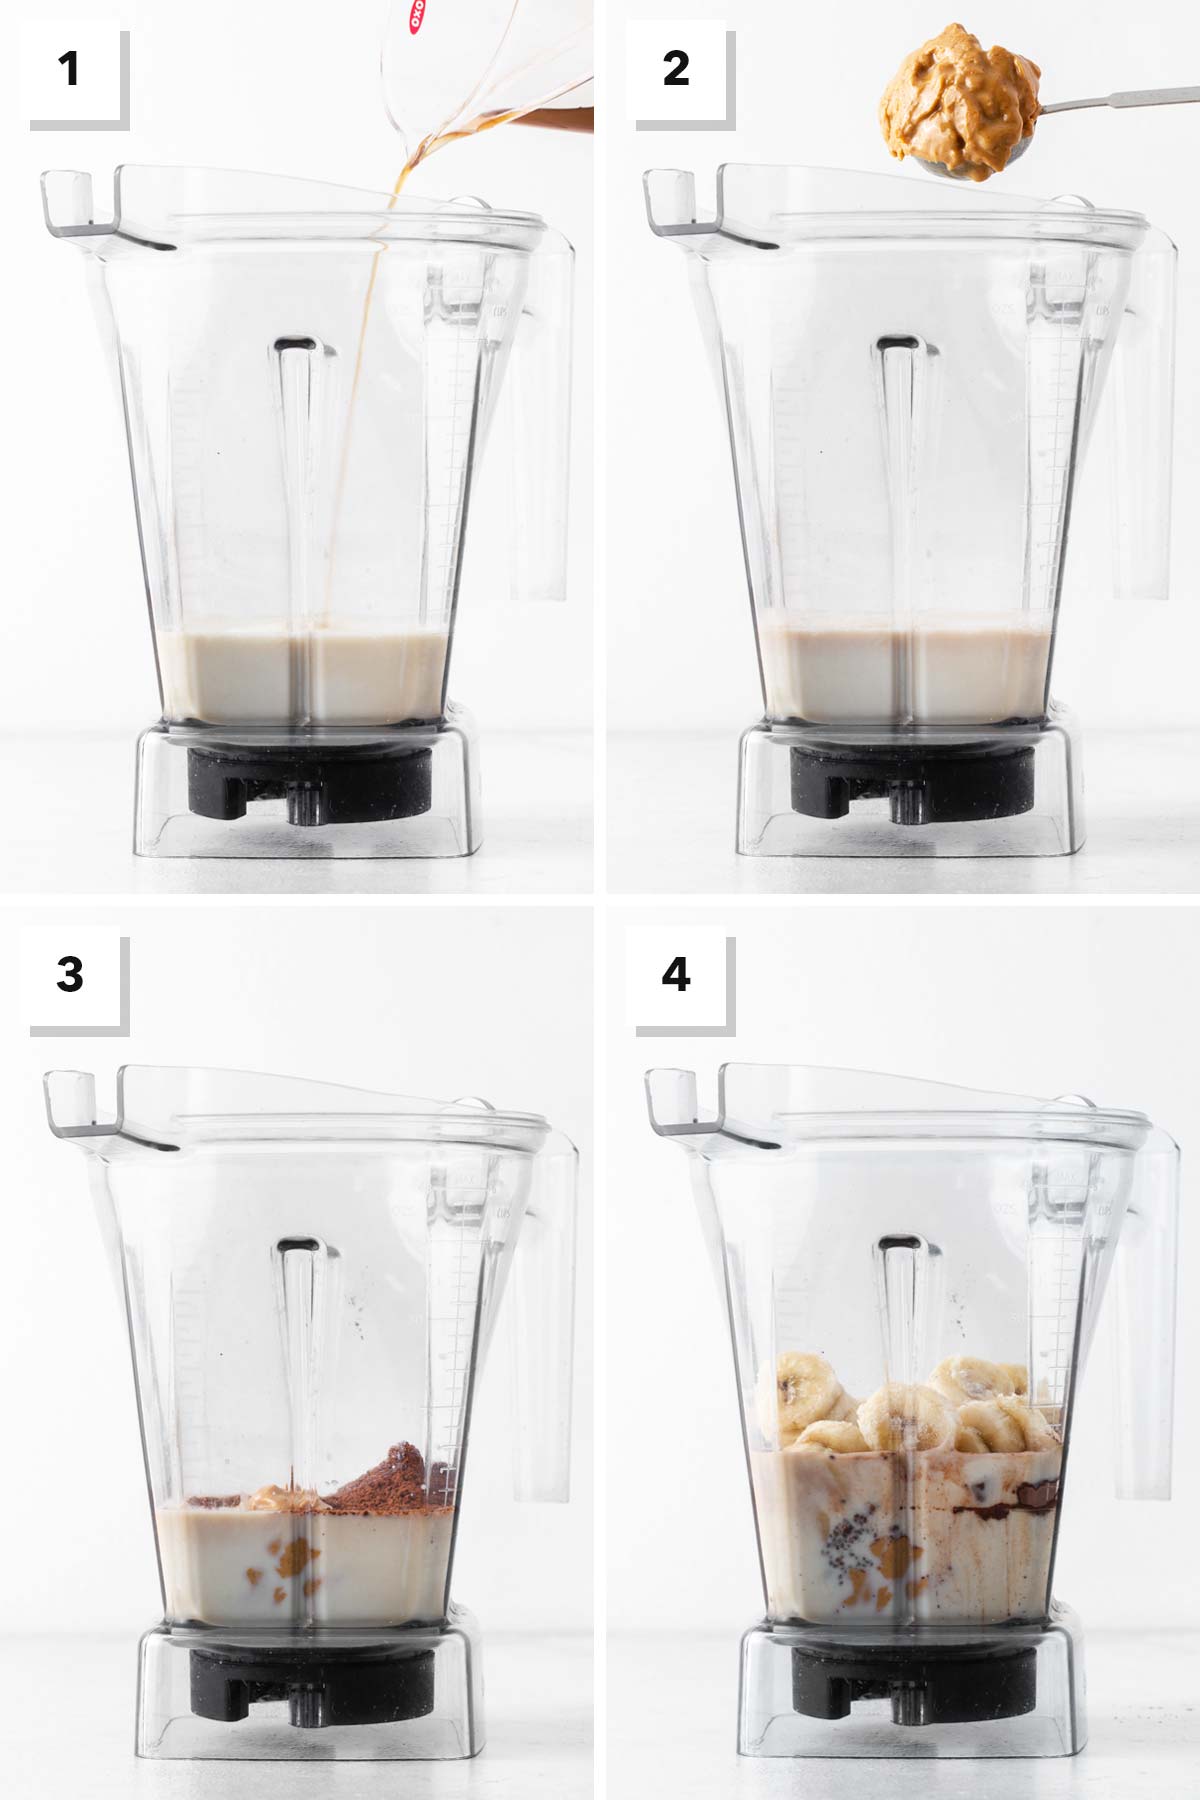 Steps for making a chocolate peanut butter banana smoothie.